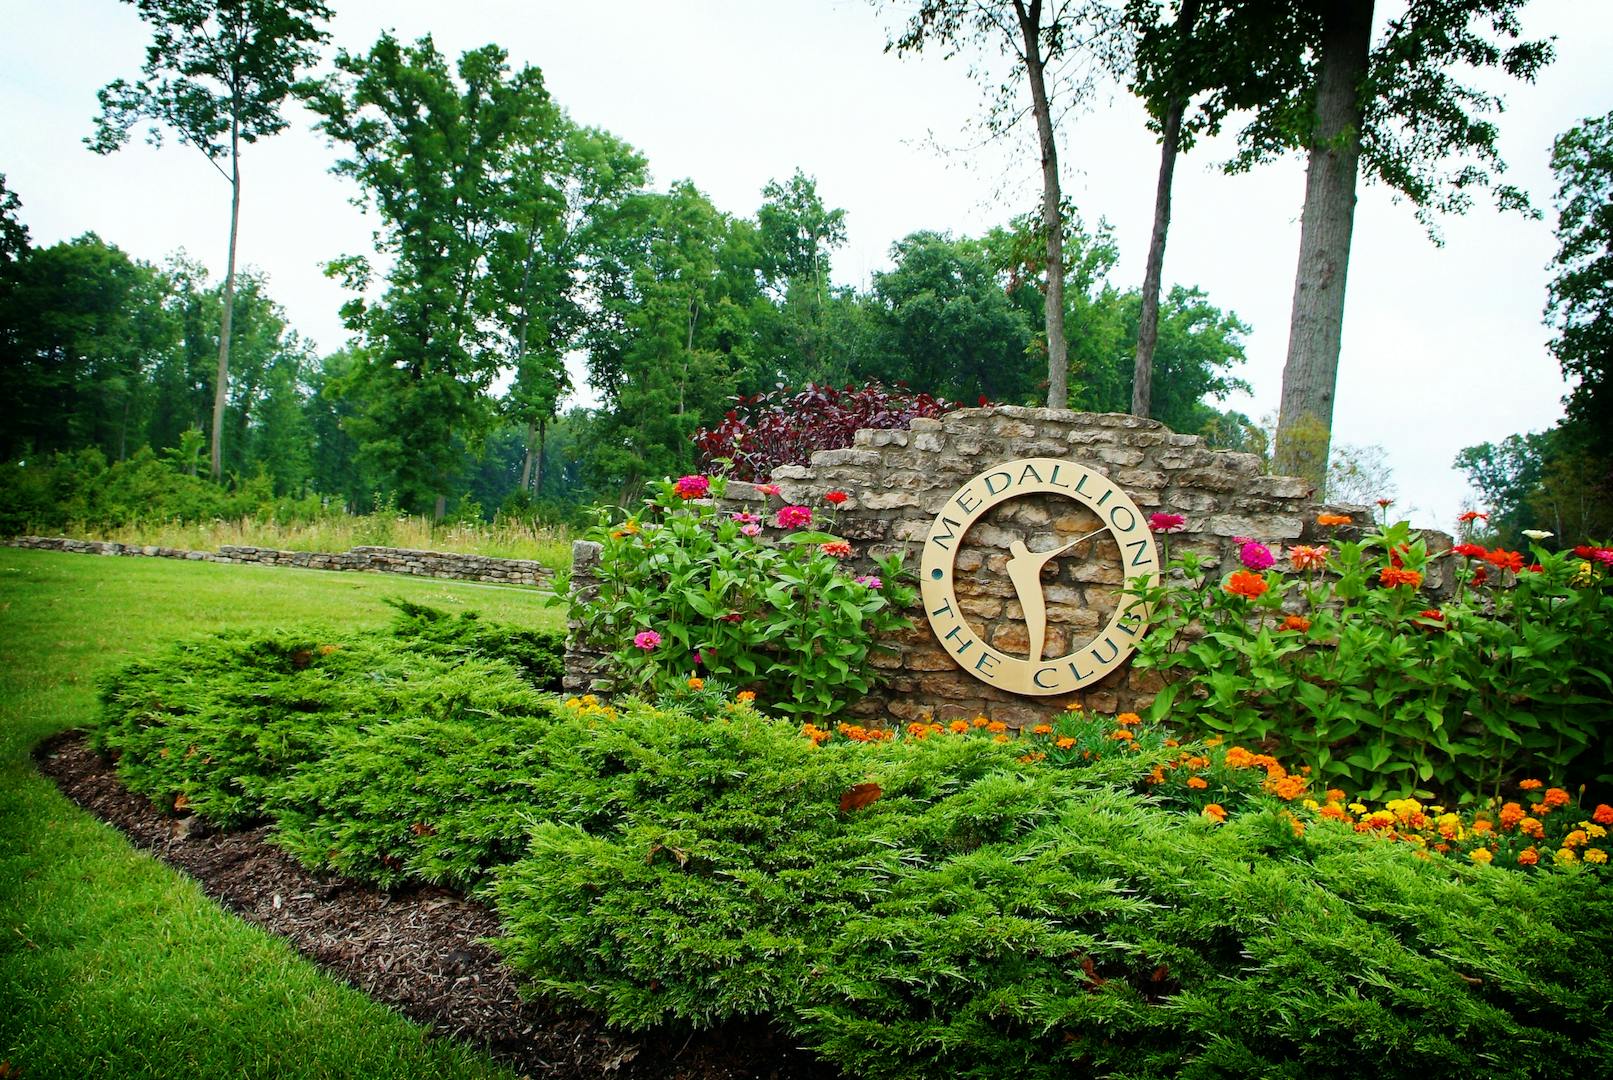 Image of The Medallion Club entry sign with flowers in bloom.